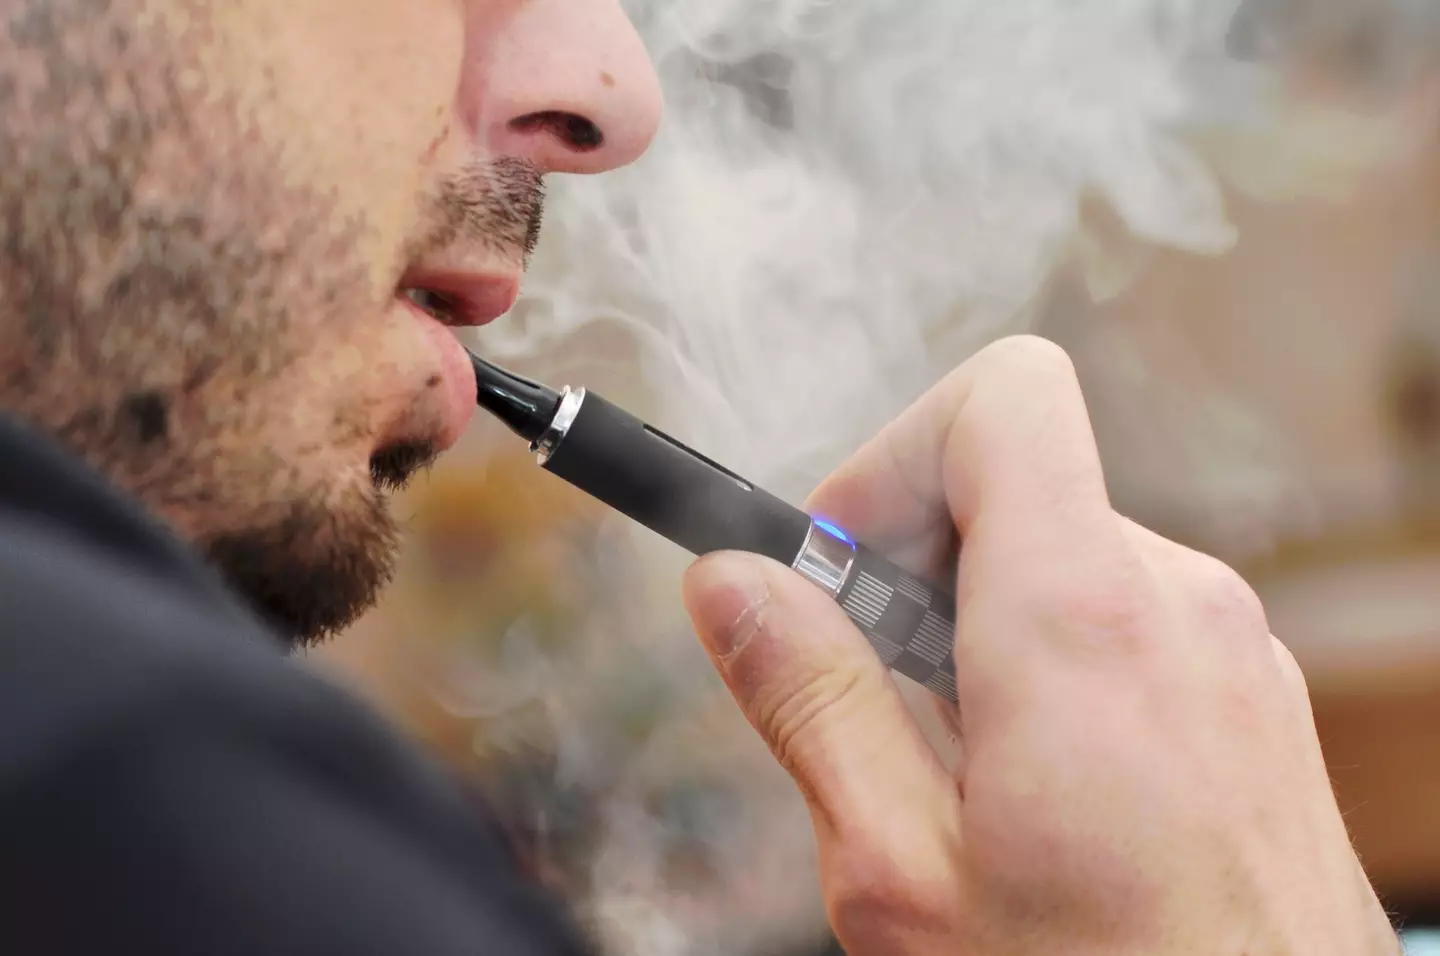 4.7 million Brits admitted to vaping.